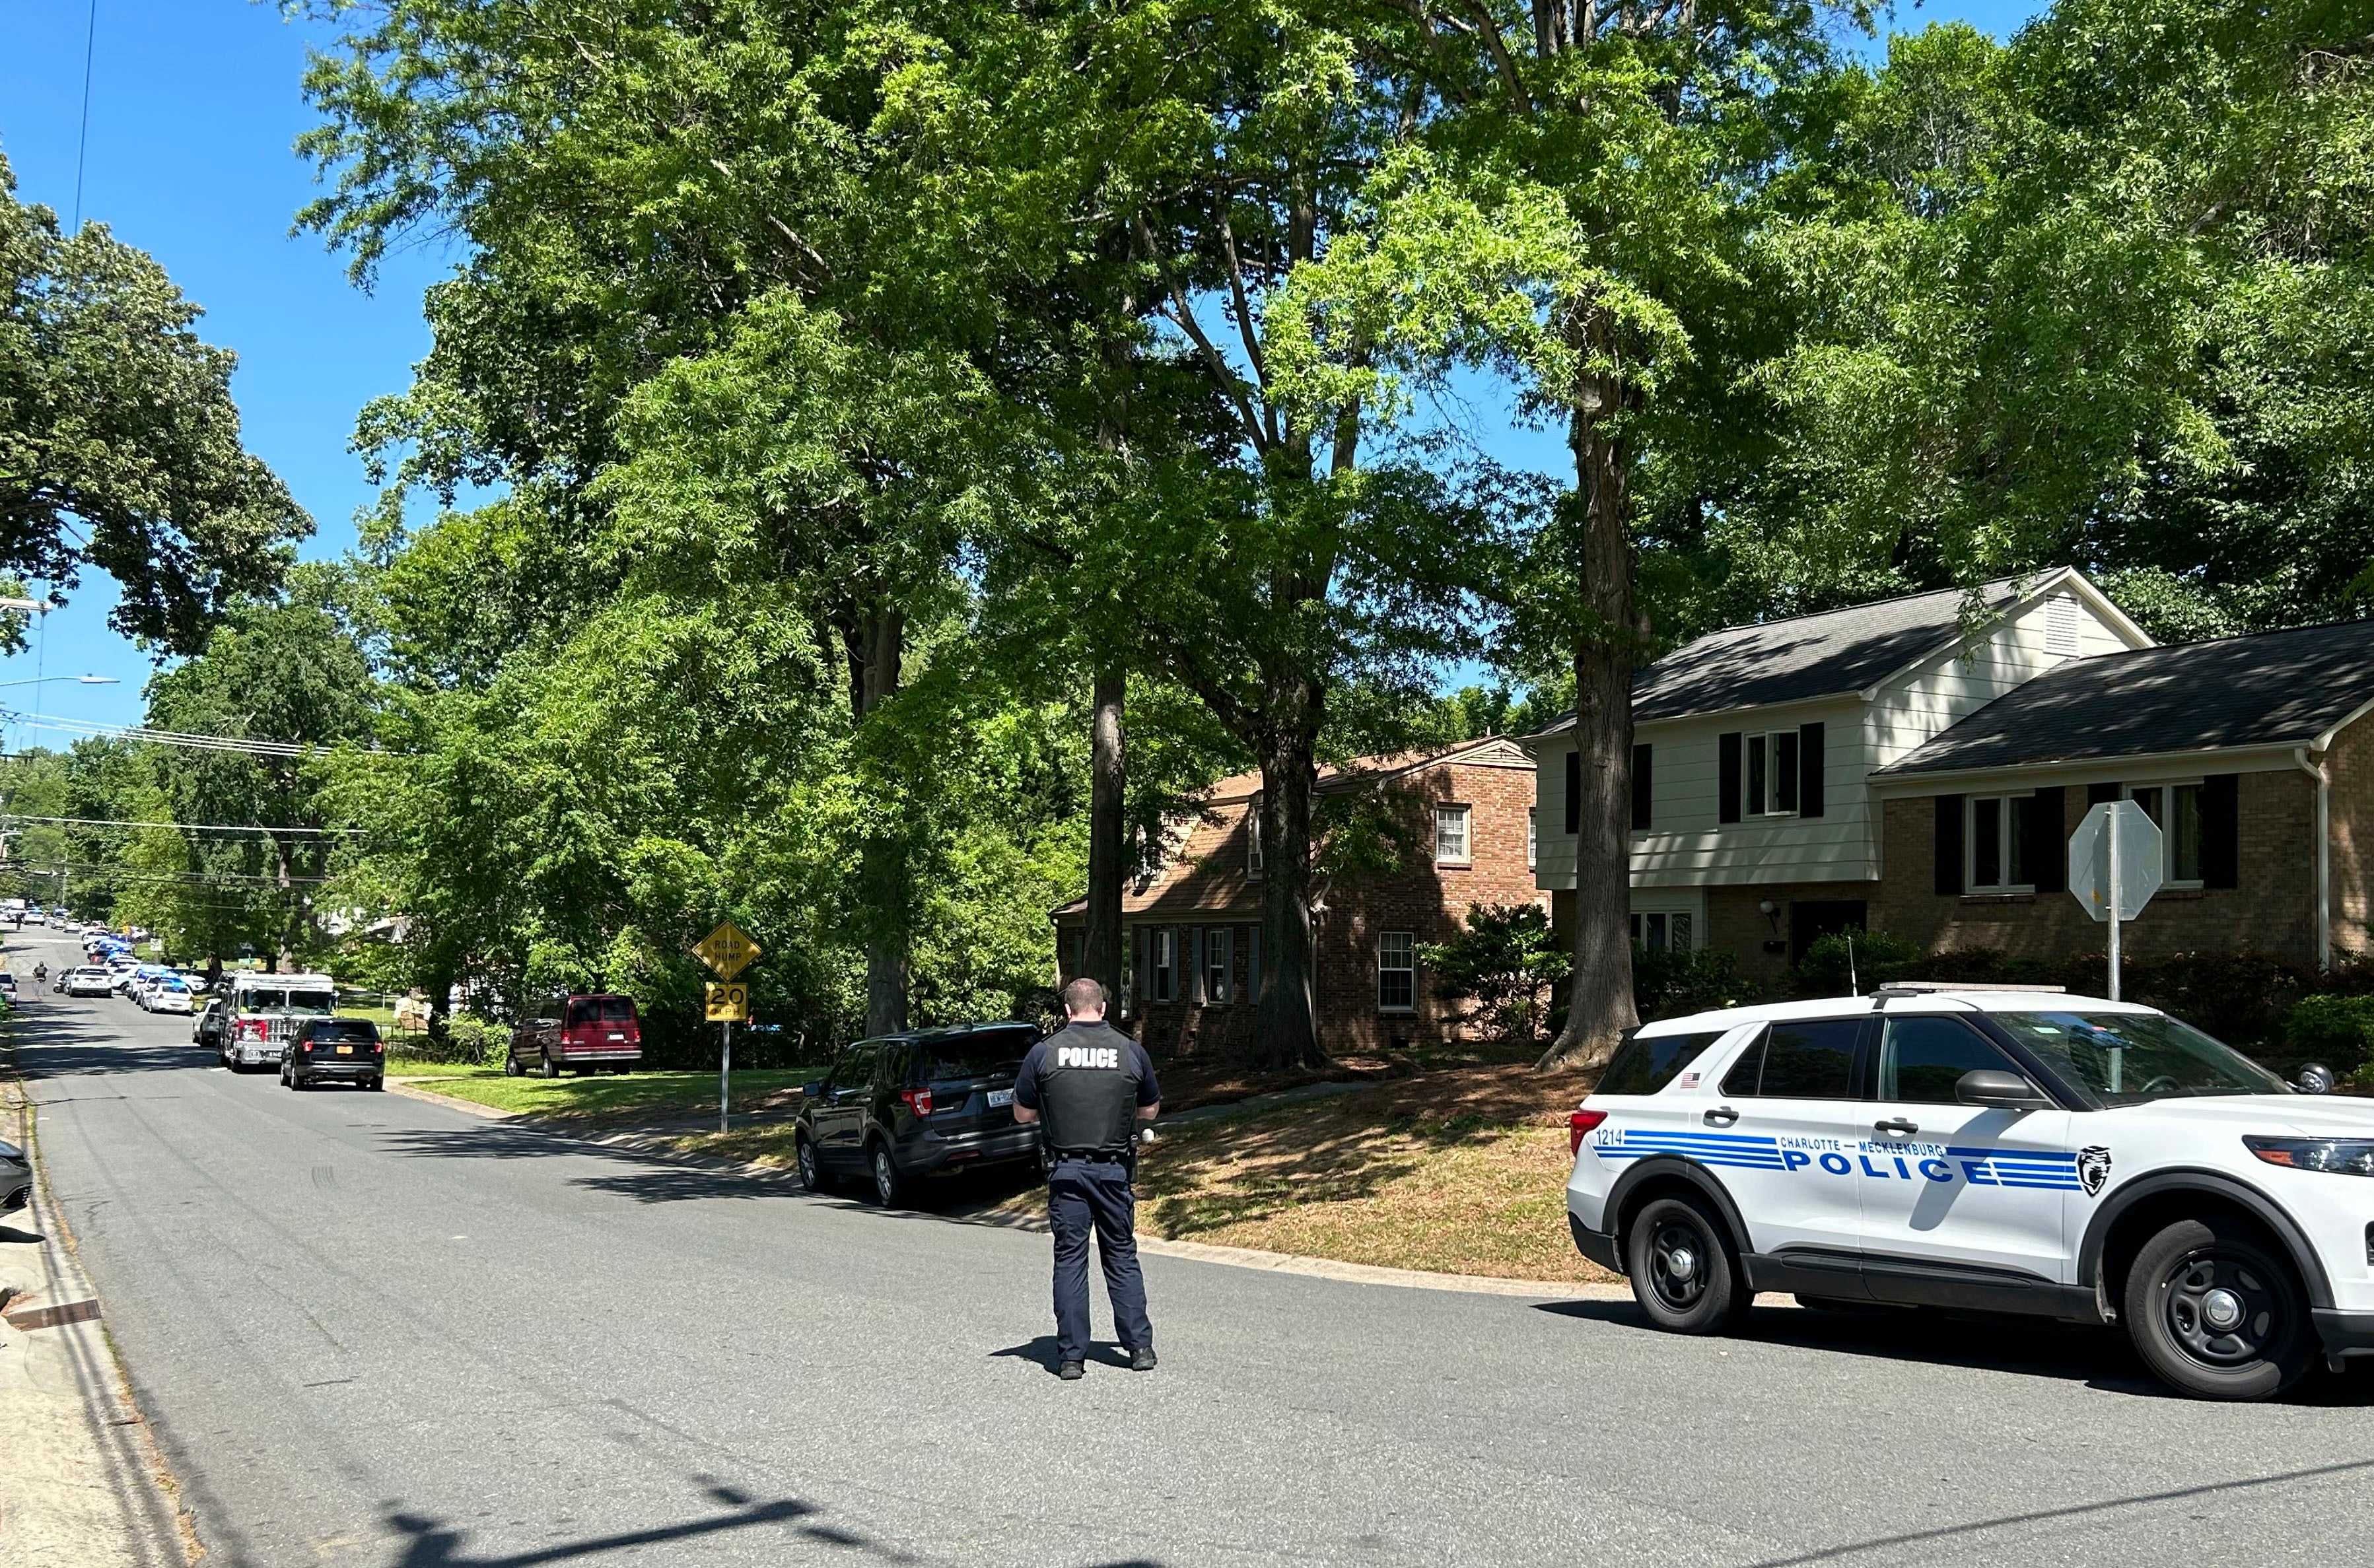 Officers were attempting to serve a warrant at a residence in east Charlotte when they were met with gunfire